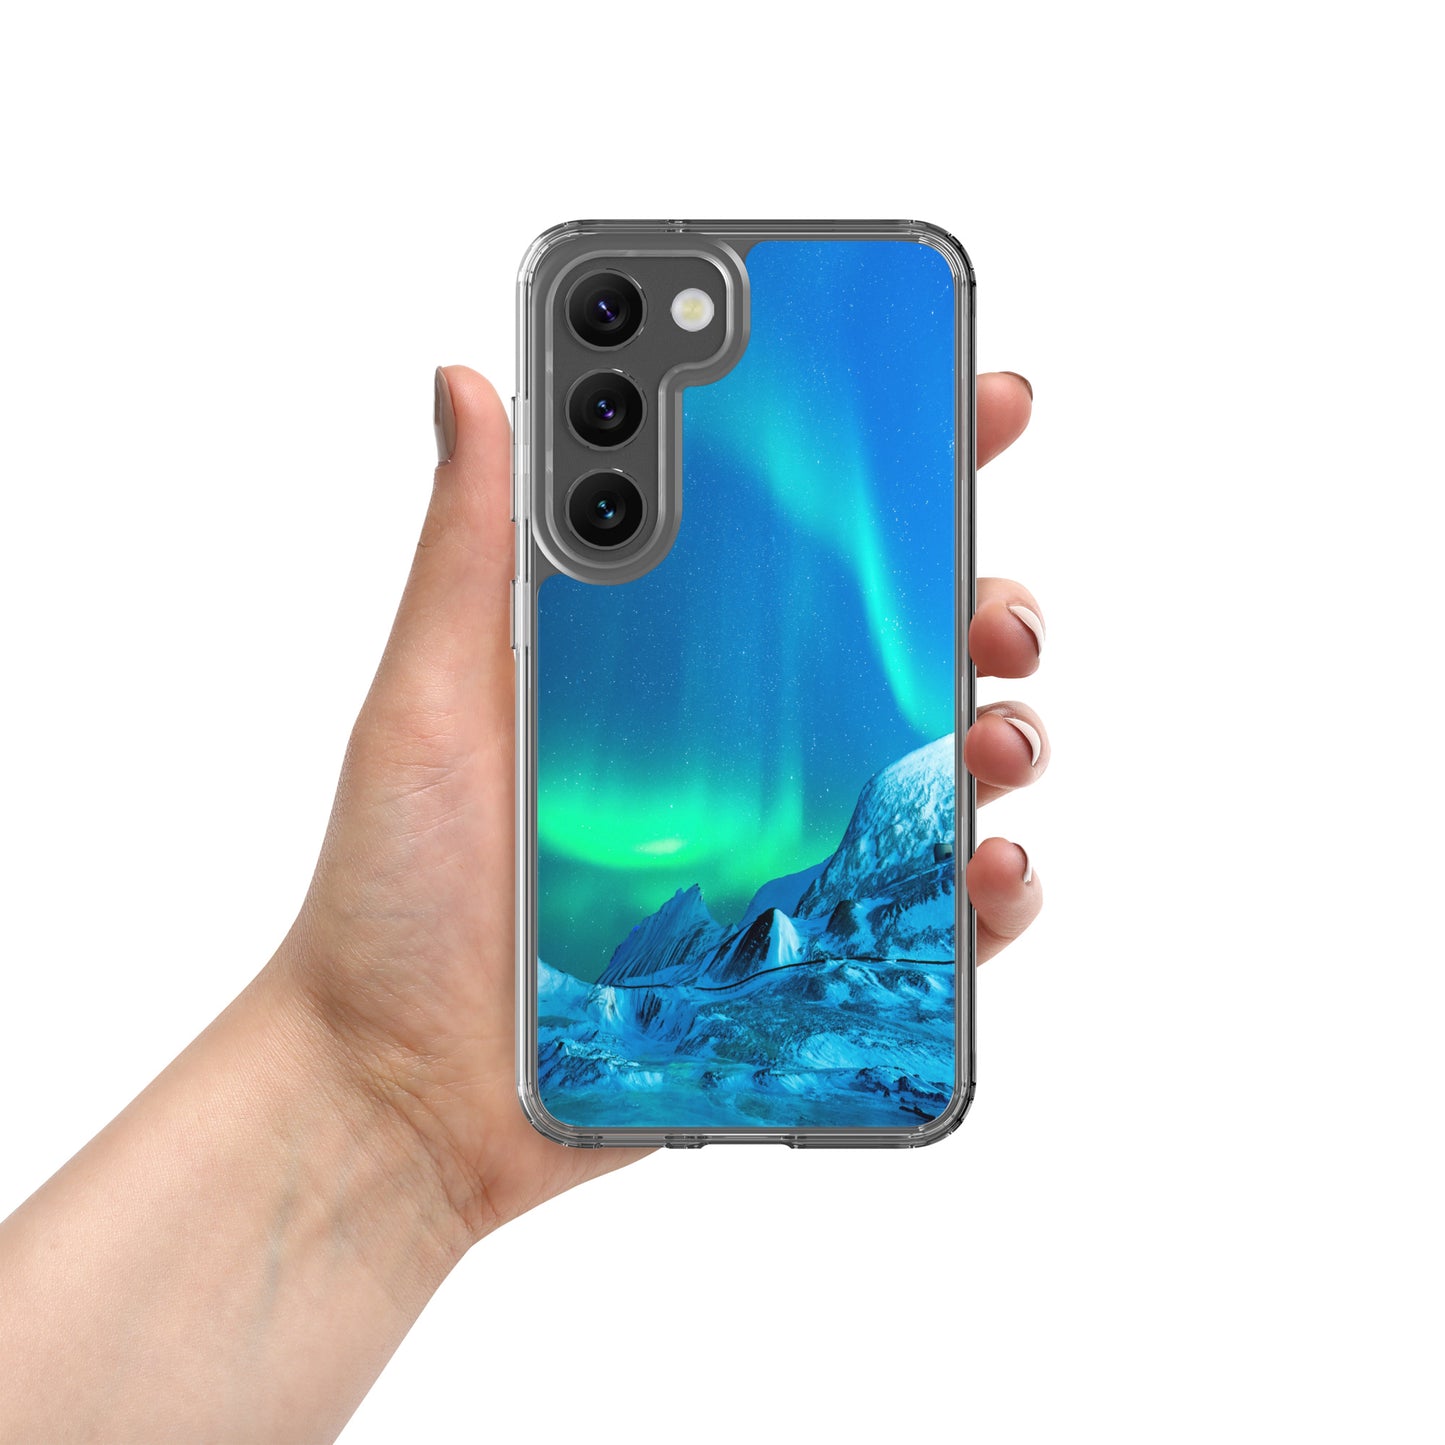 Unique Aurora Borealis Samsung Cover Case - Northern Light Phone Cover Case - Clear Case for Samsung Galaxy - Perfect Aurora Lovers Gift 3